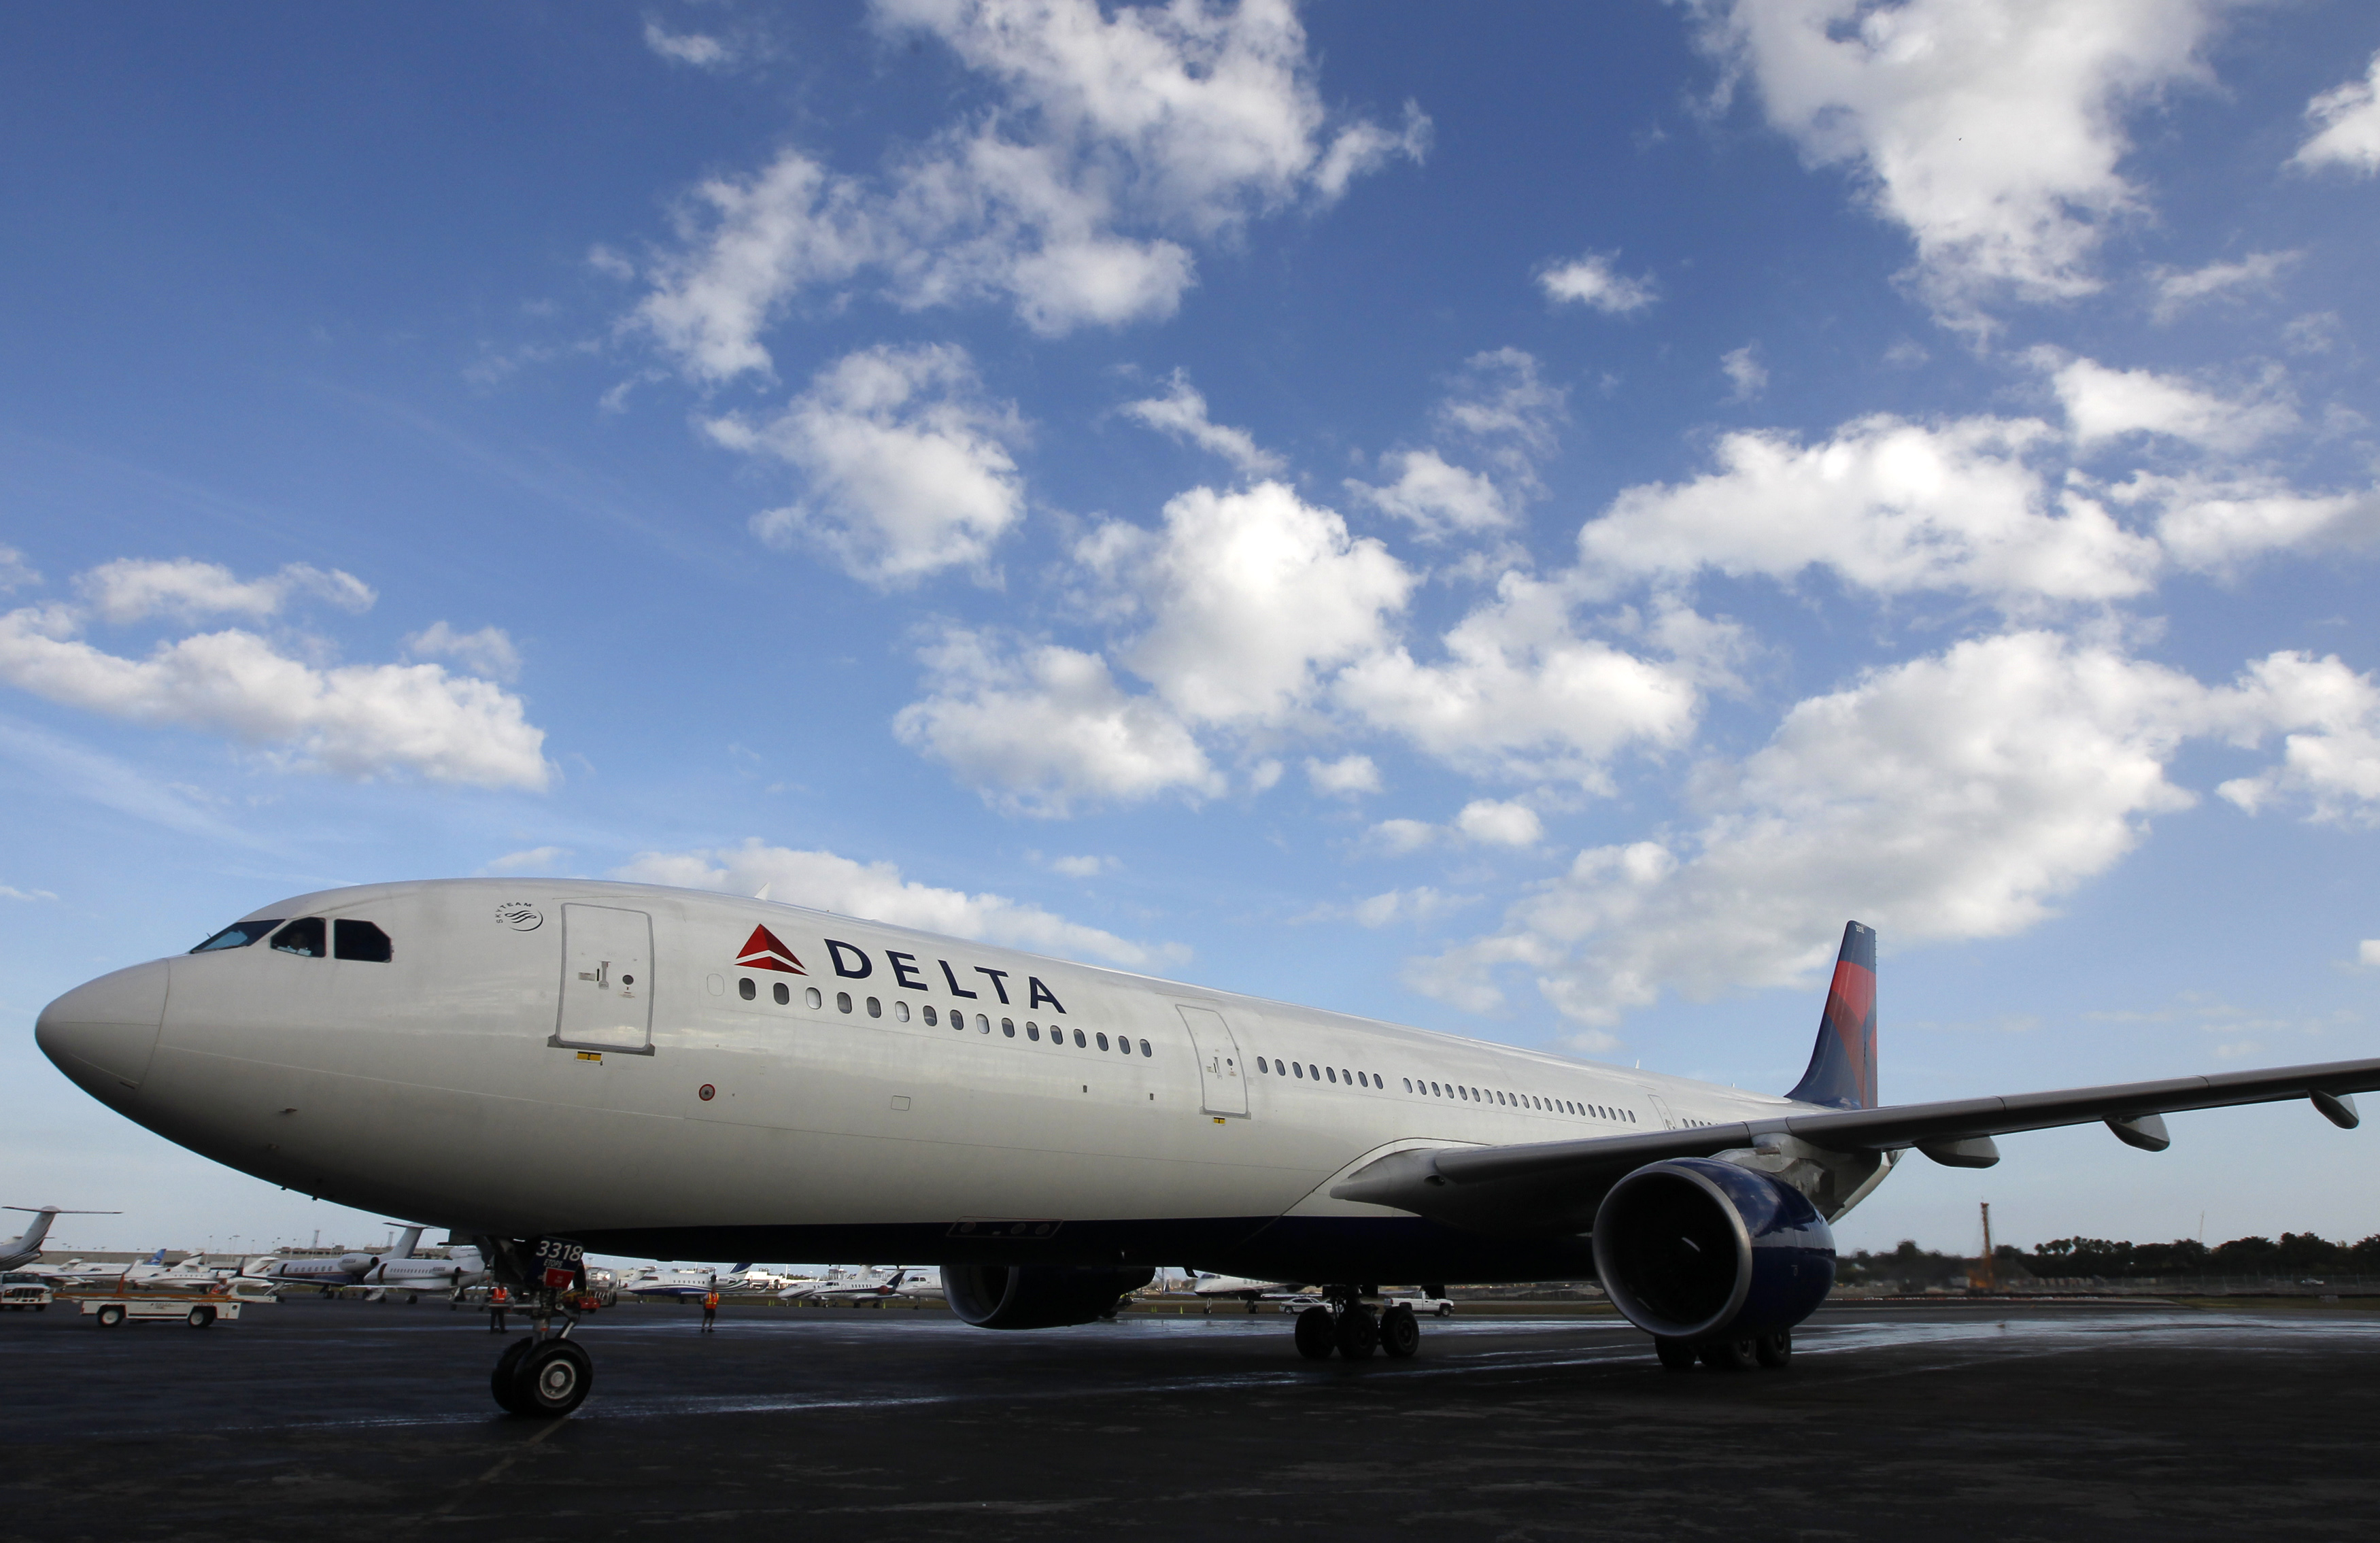 The Delta Airlines Charter at the Ft. Lauderdale-Hollywood International Airport in Ft. Lauderdale, Florida on January 2, 2013. (Jeff Haynes—Reuters)